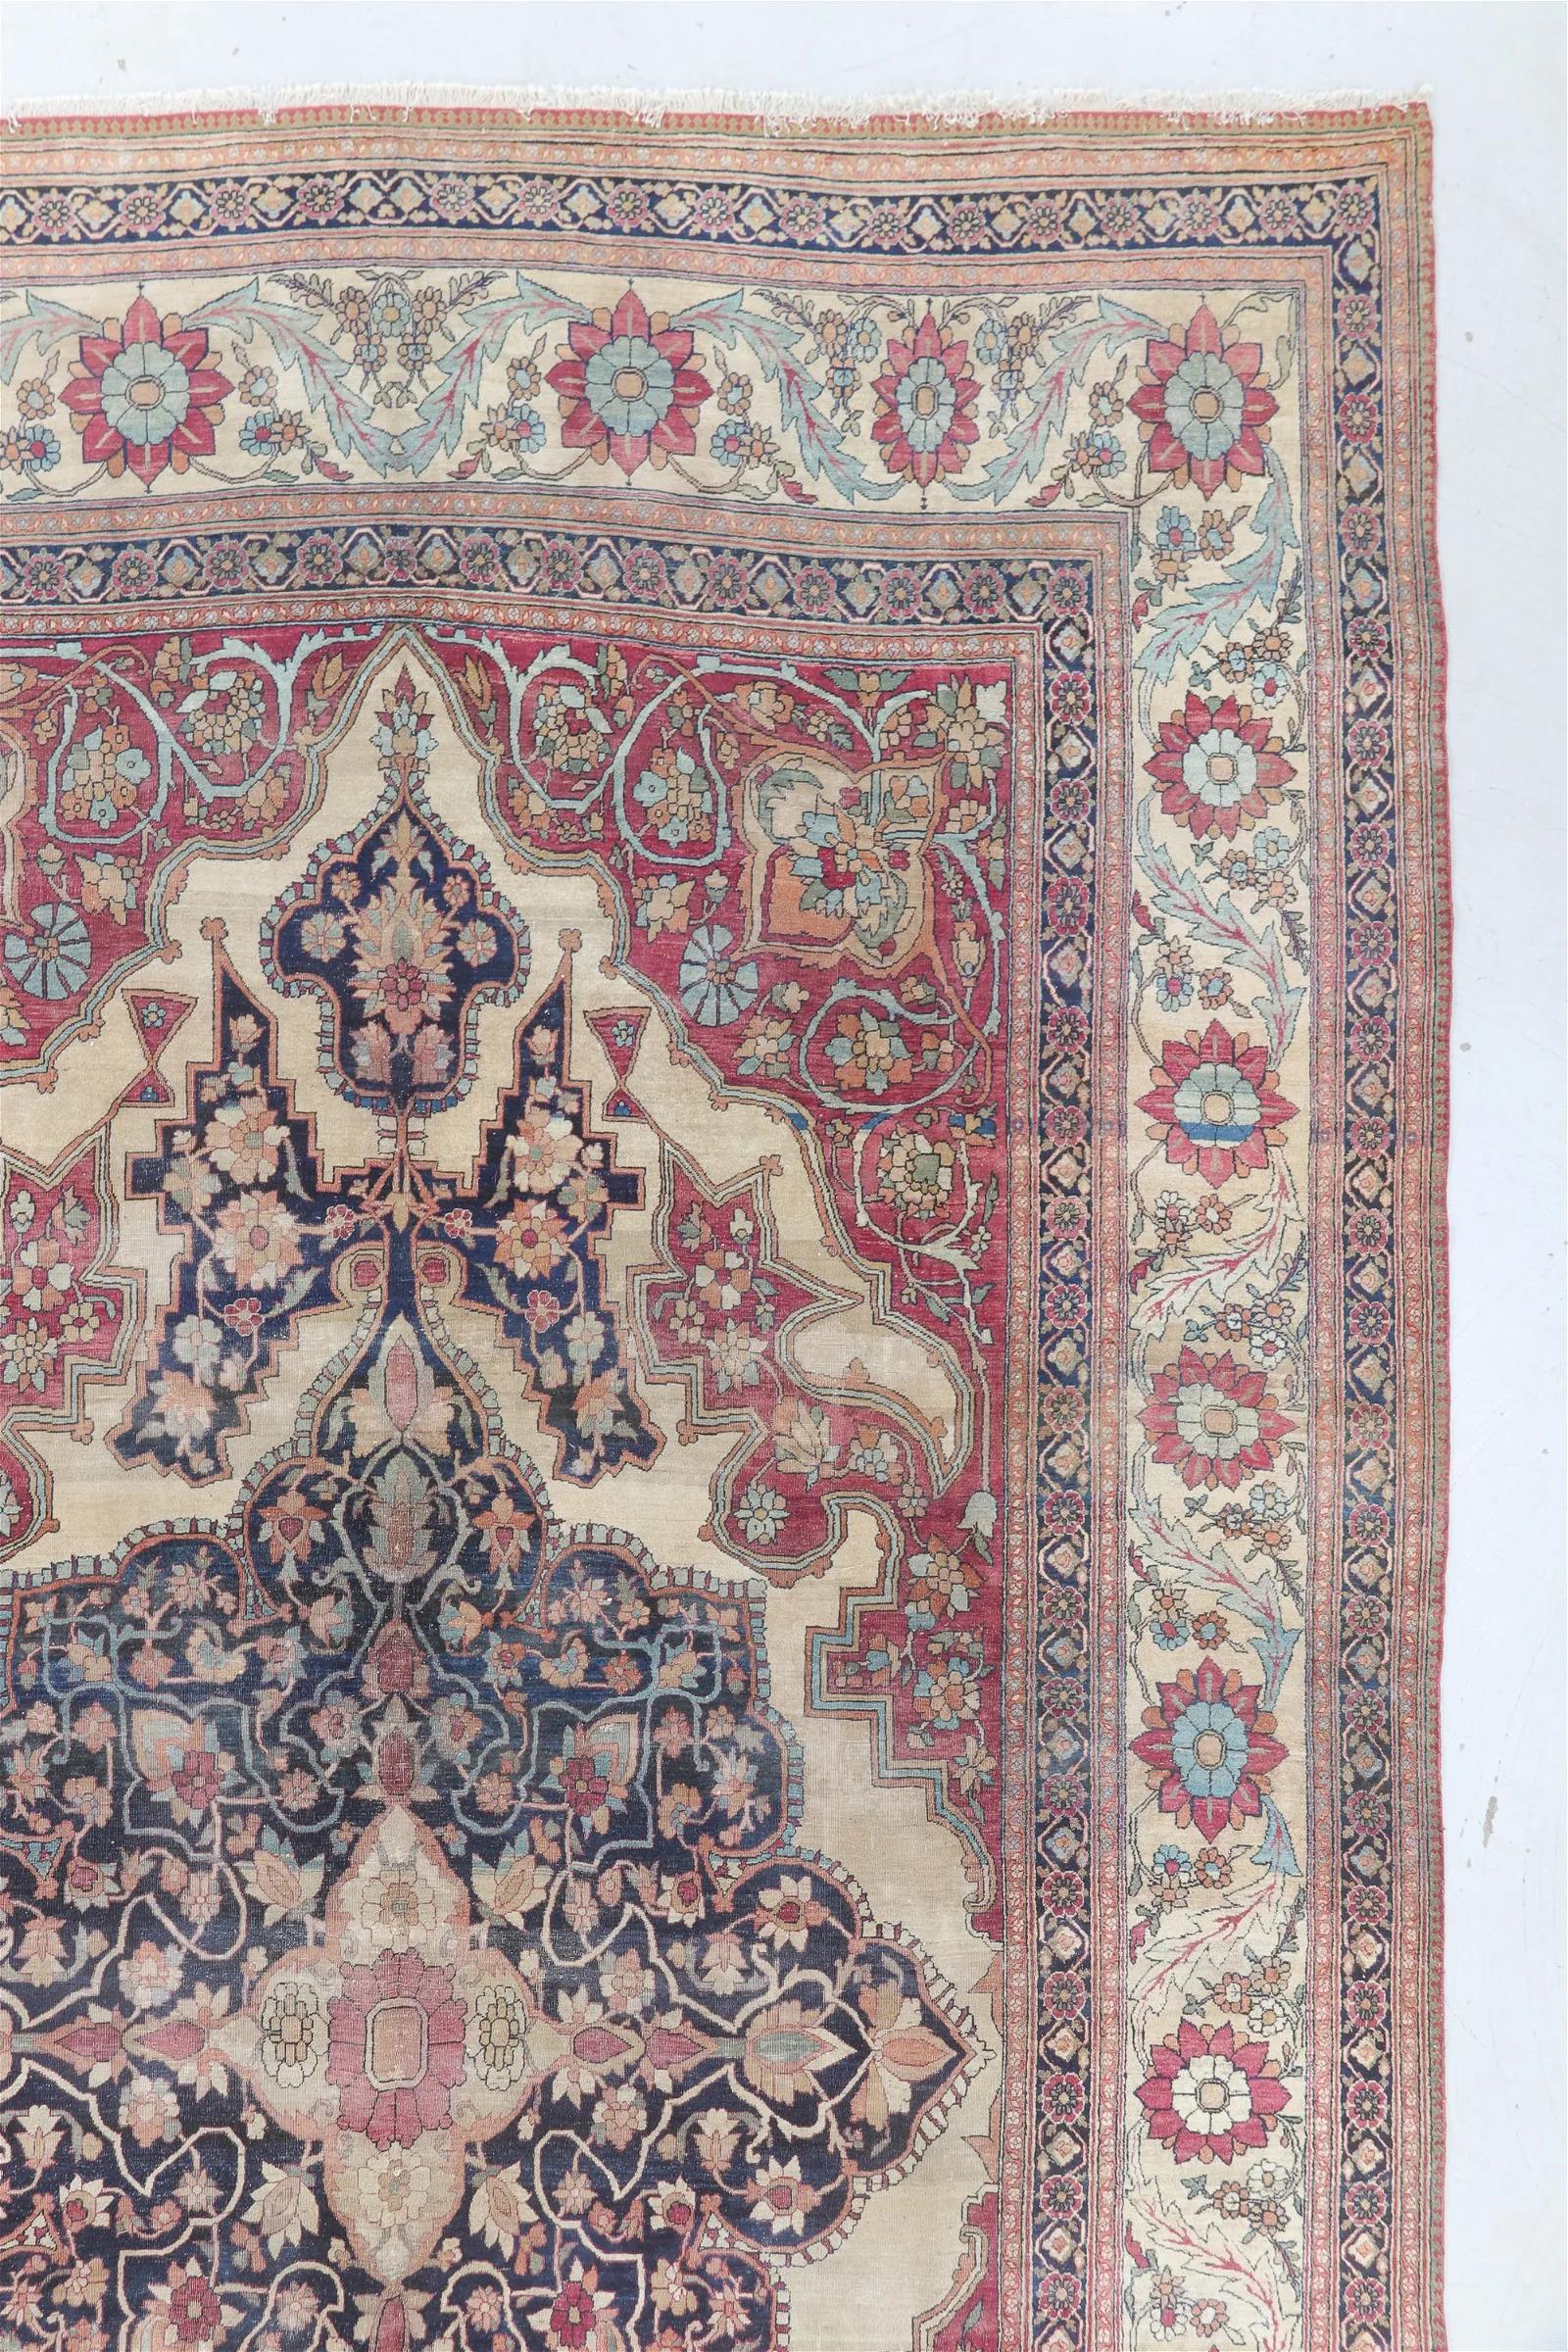 Elevate your space with the grandeur of the past with this exceptional Mansion Size Lavar Kerman Rug, originating from Persia and dating back to circa 1870. With its impressive dimensions measuring 9 feet 4 inches in width and 18 feet 8 inches in